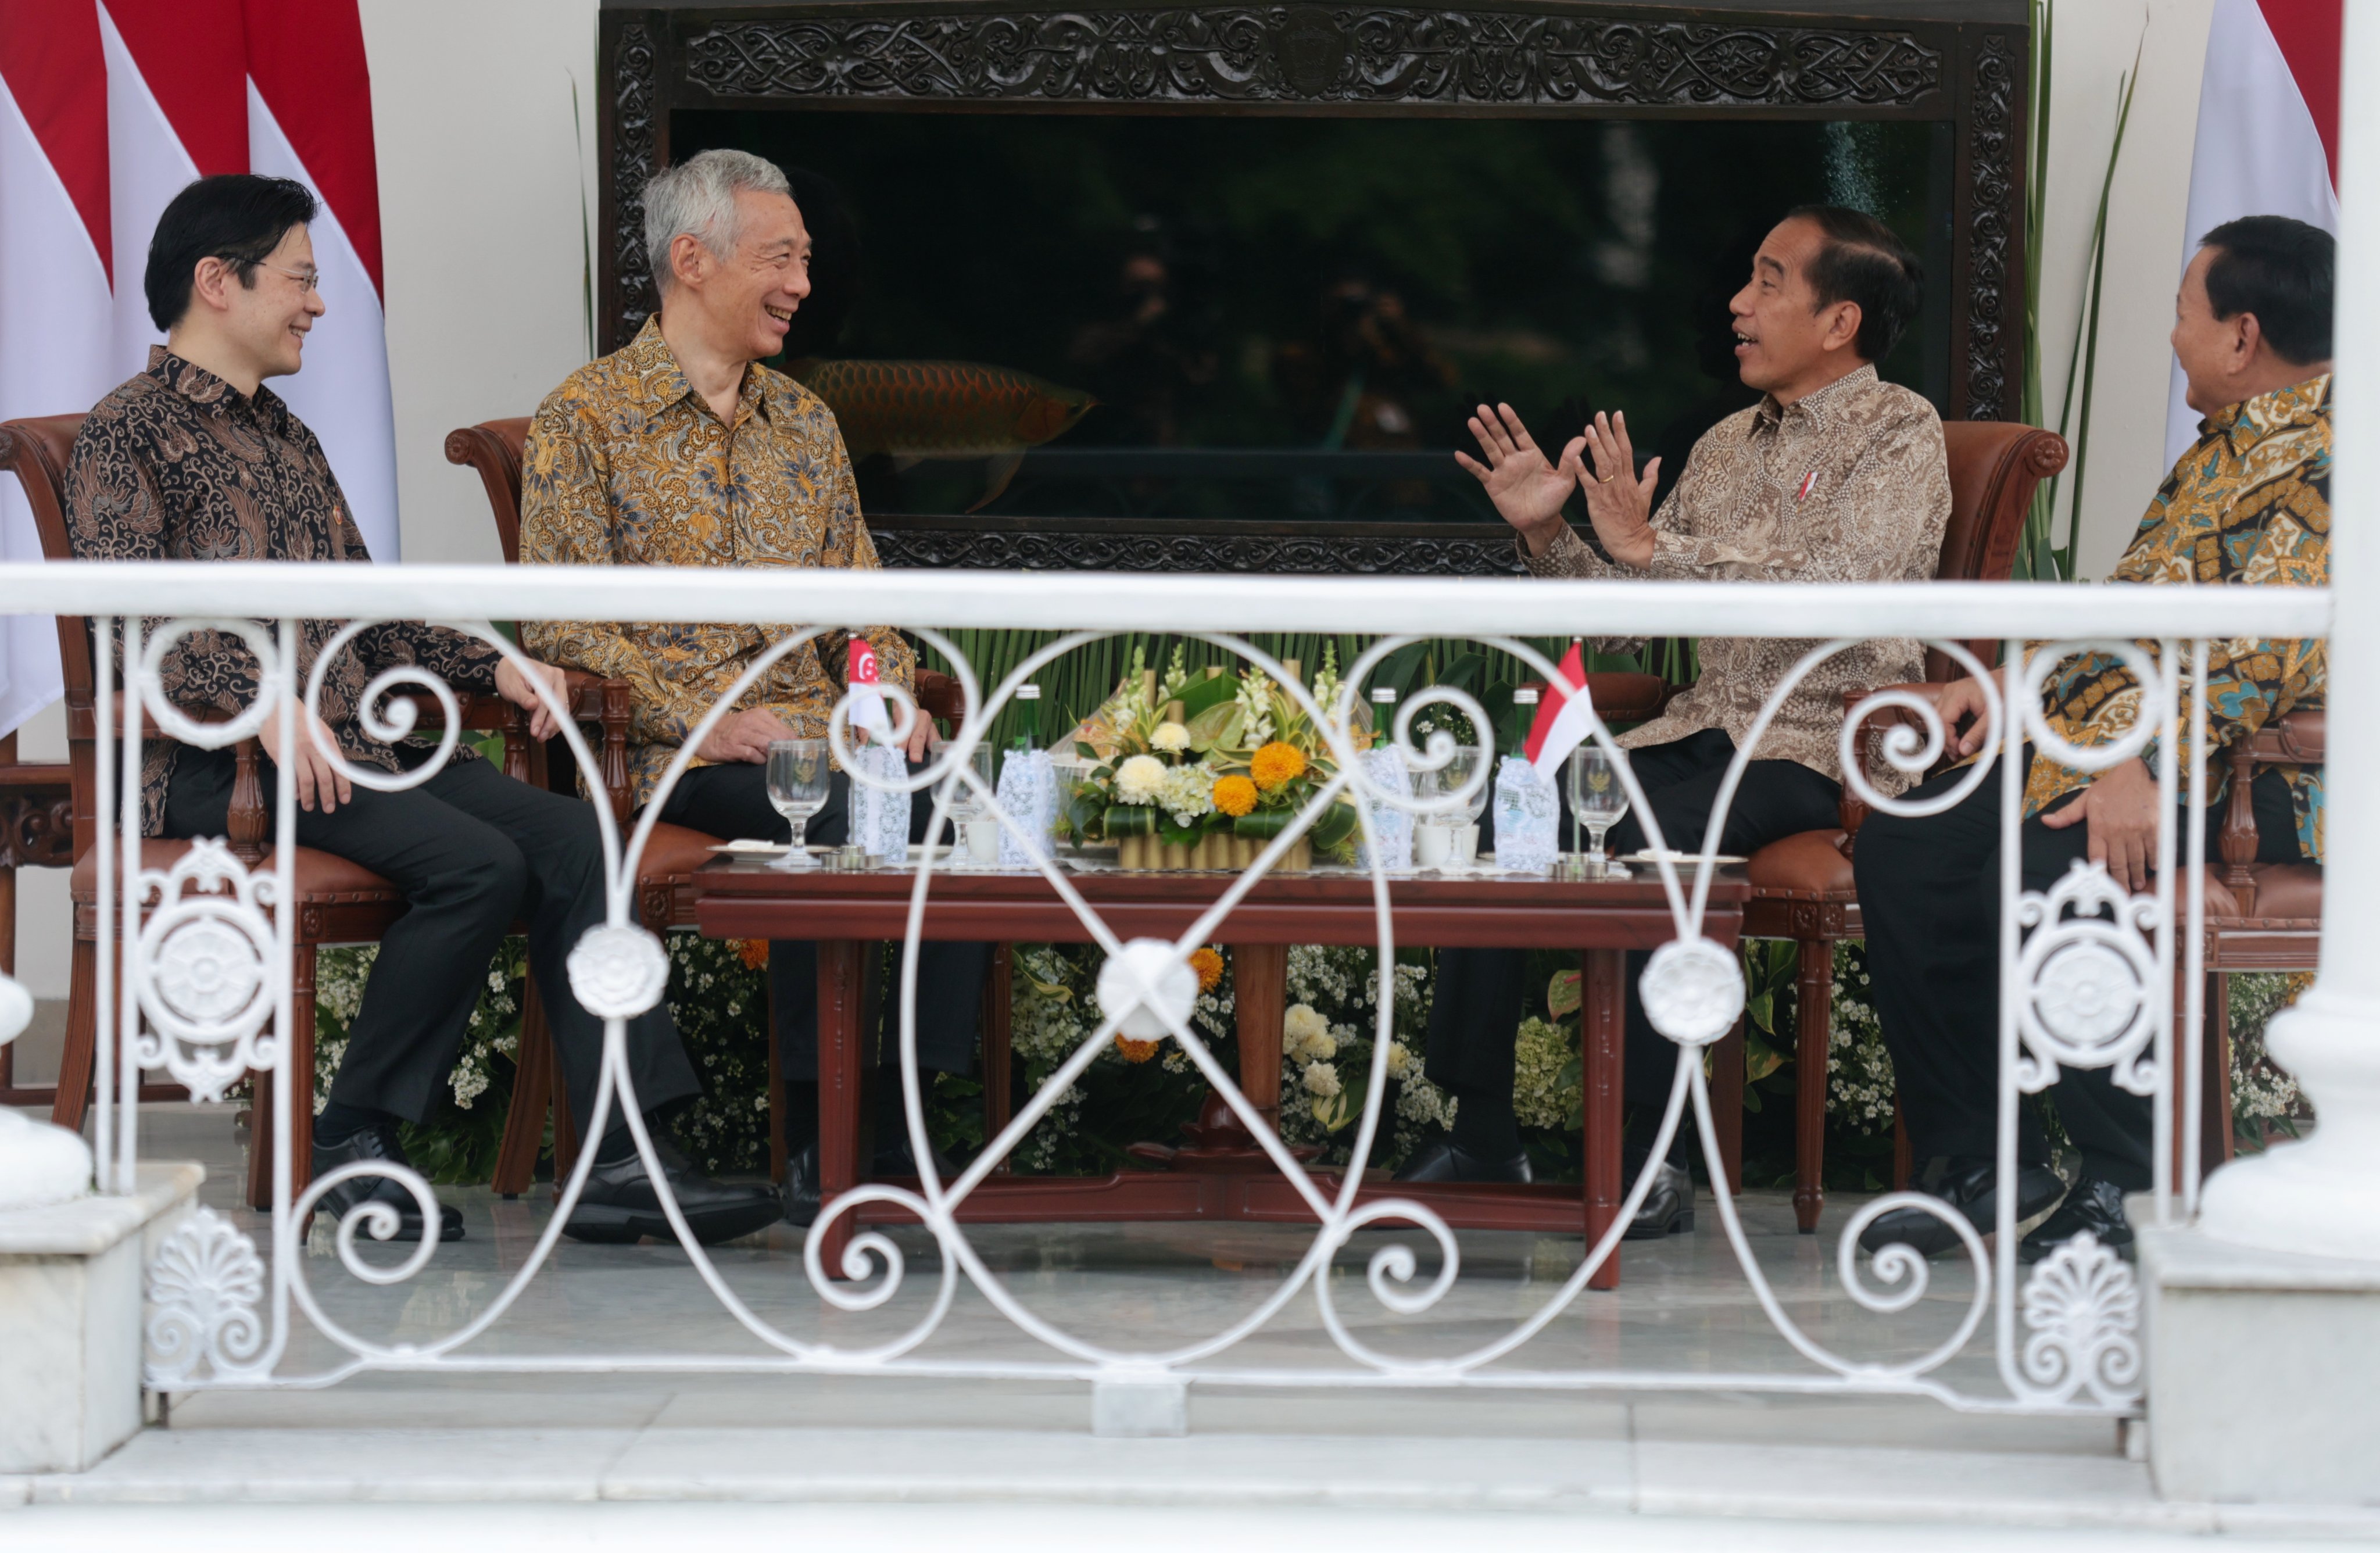 Singapore Prime Minister Lee Hsien Loong and his deputy Lawrence Wong talk to Indonesian President Joko Widodo and Defence Minister Prabowo Subianto during their meeting at the Presidential Palace in Bogor, Indonesia, on Monday. Photo: EPA-EFE